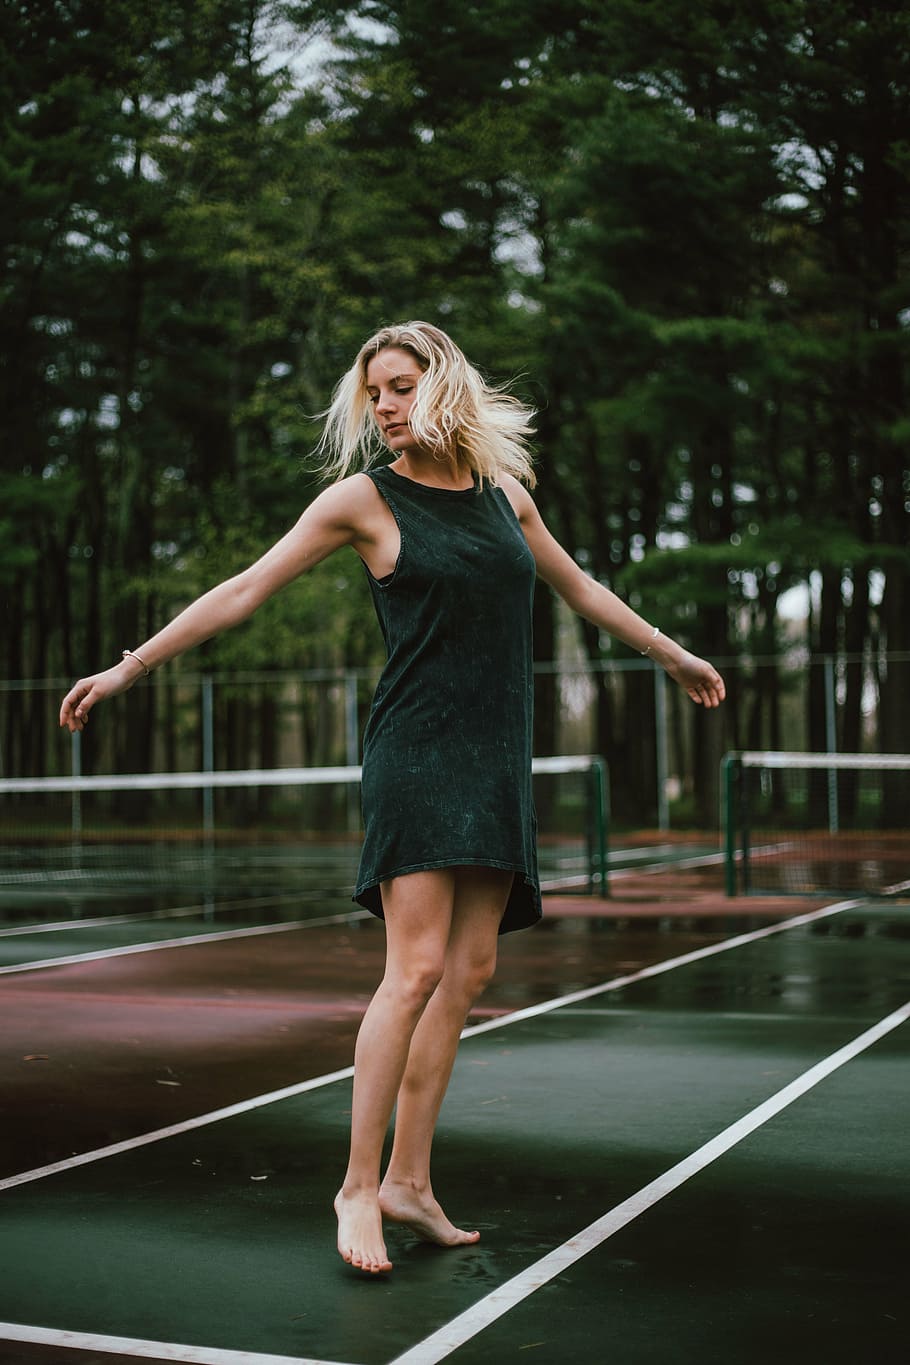 woman, standing, green, maroon, tennis court, people, girl, dancing, court, outside